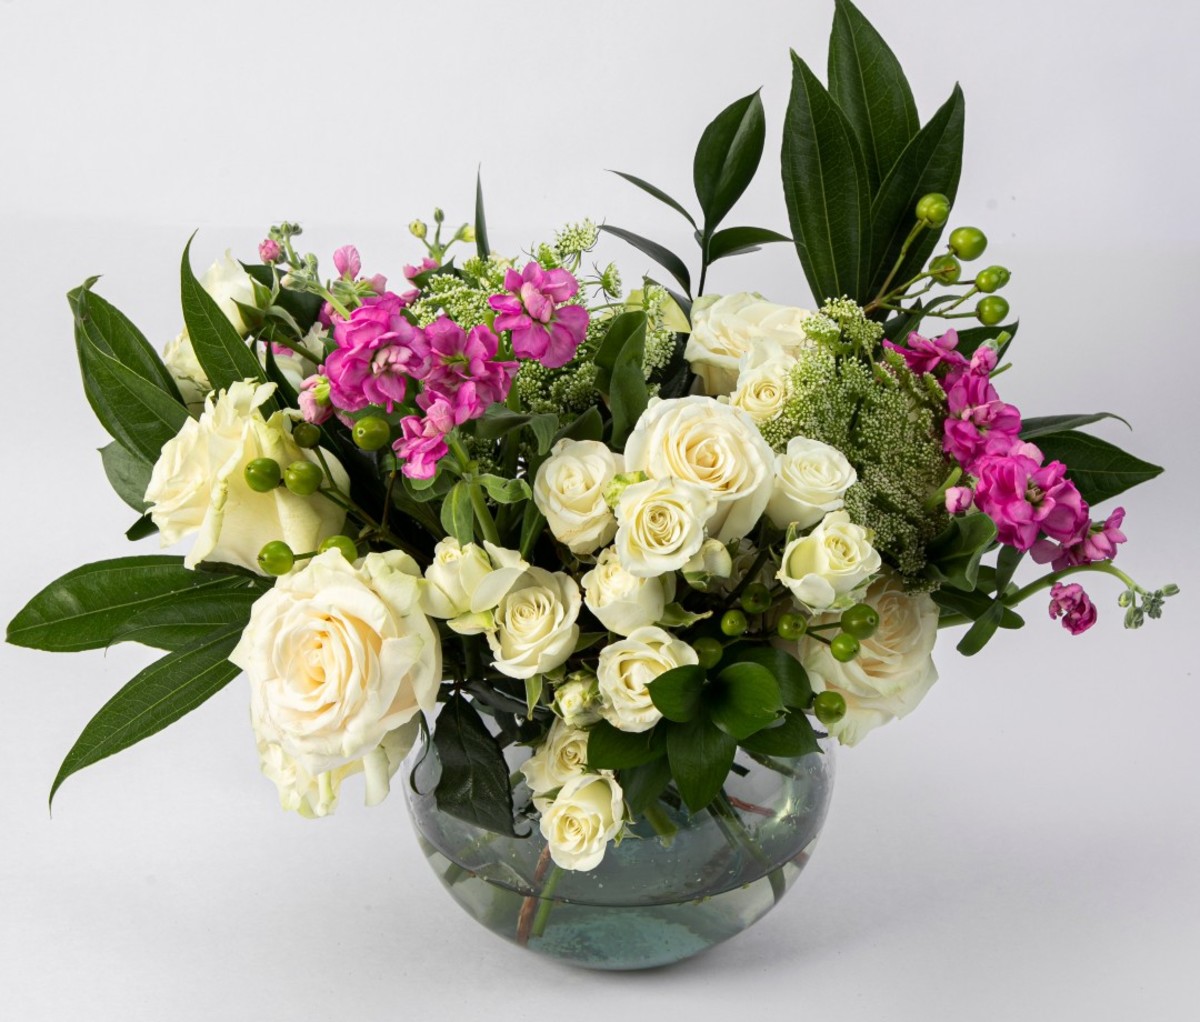 Bouquet of white and pink flowers in vase